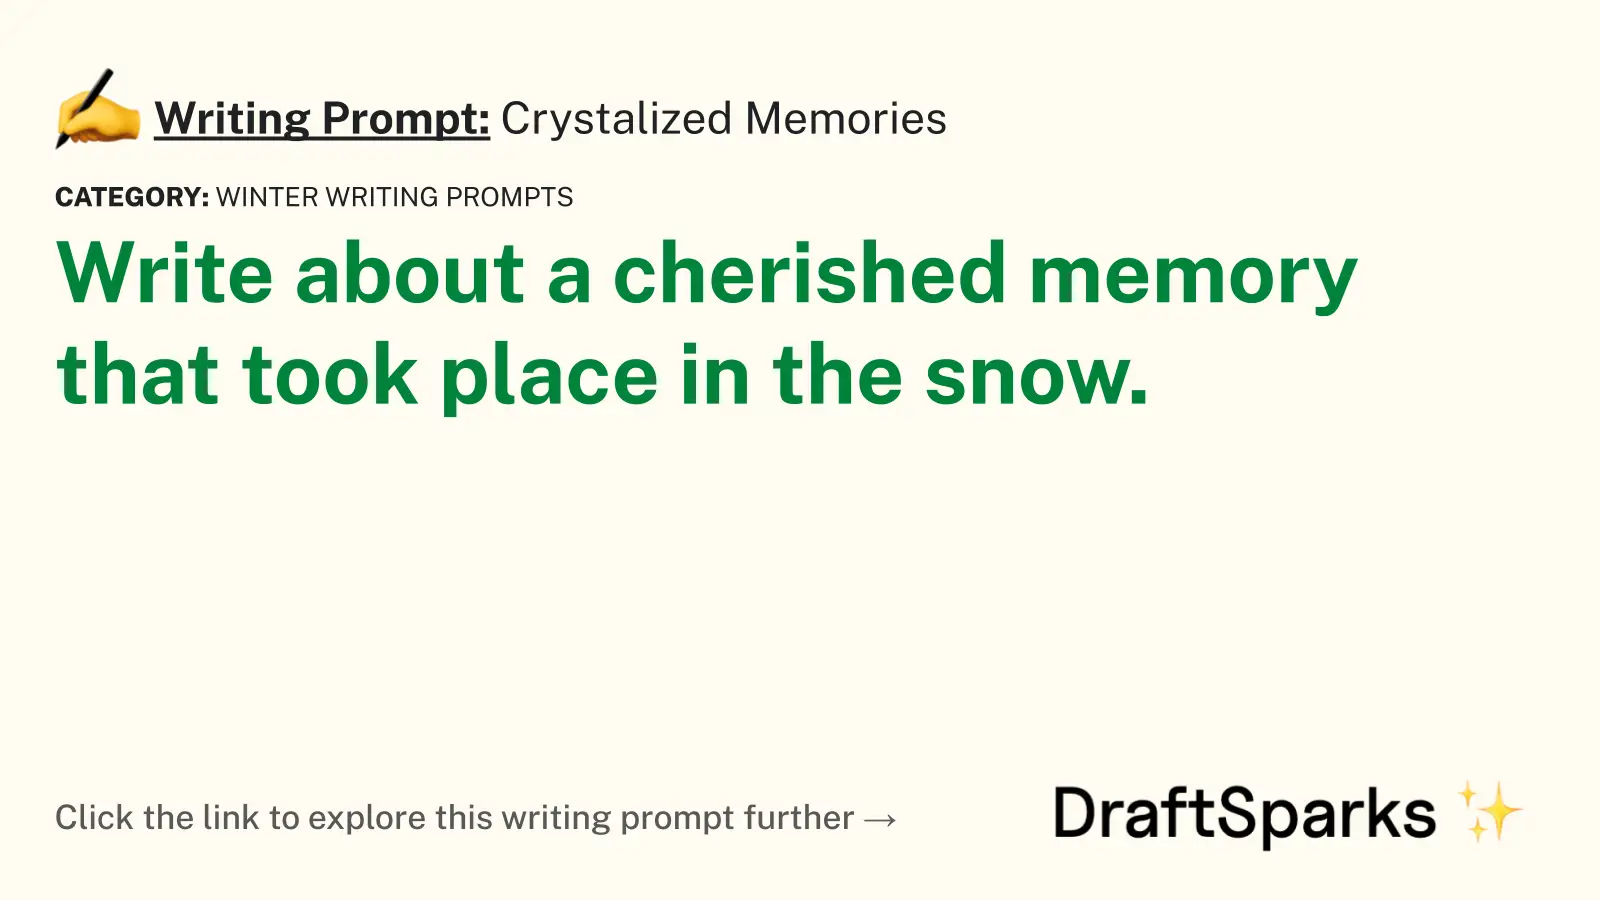 Crystalized Memories